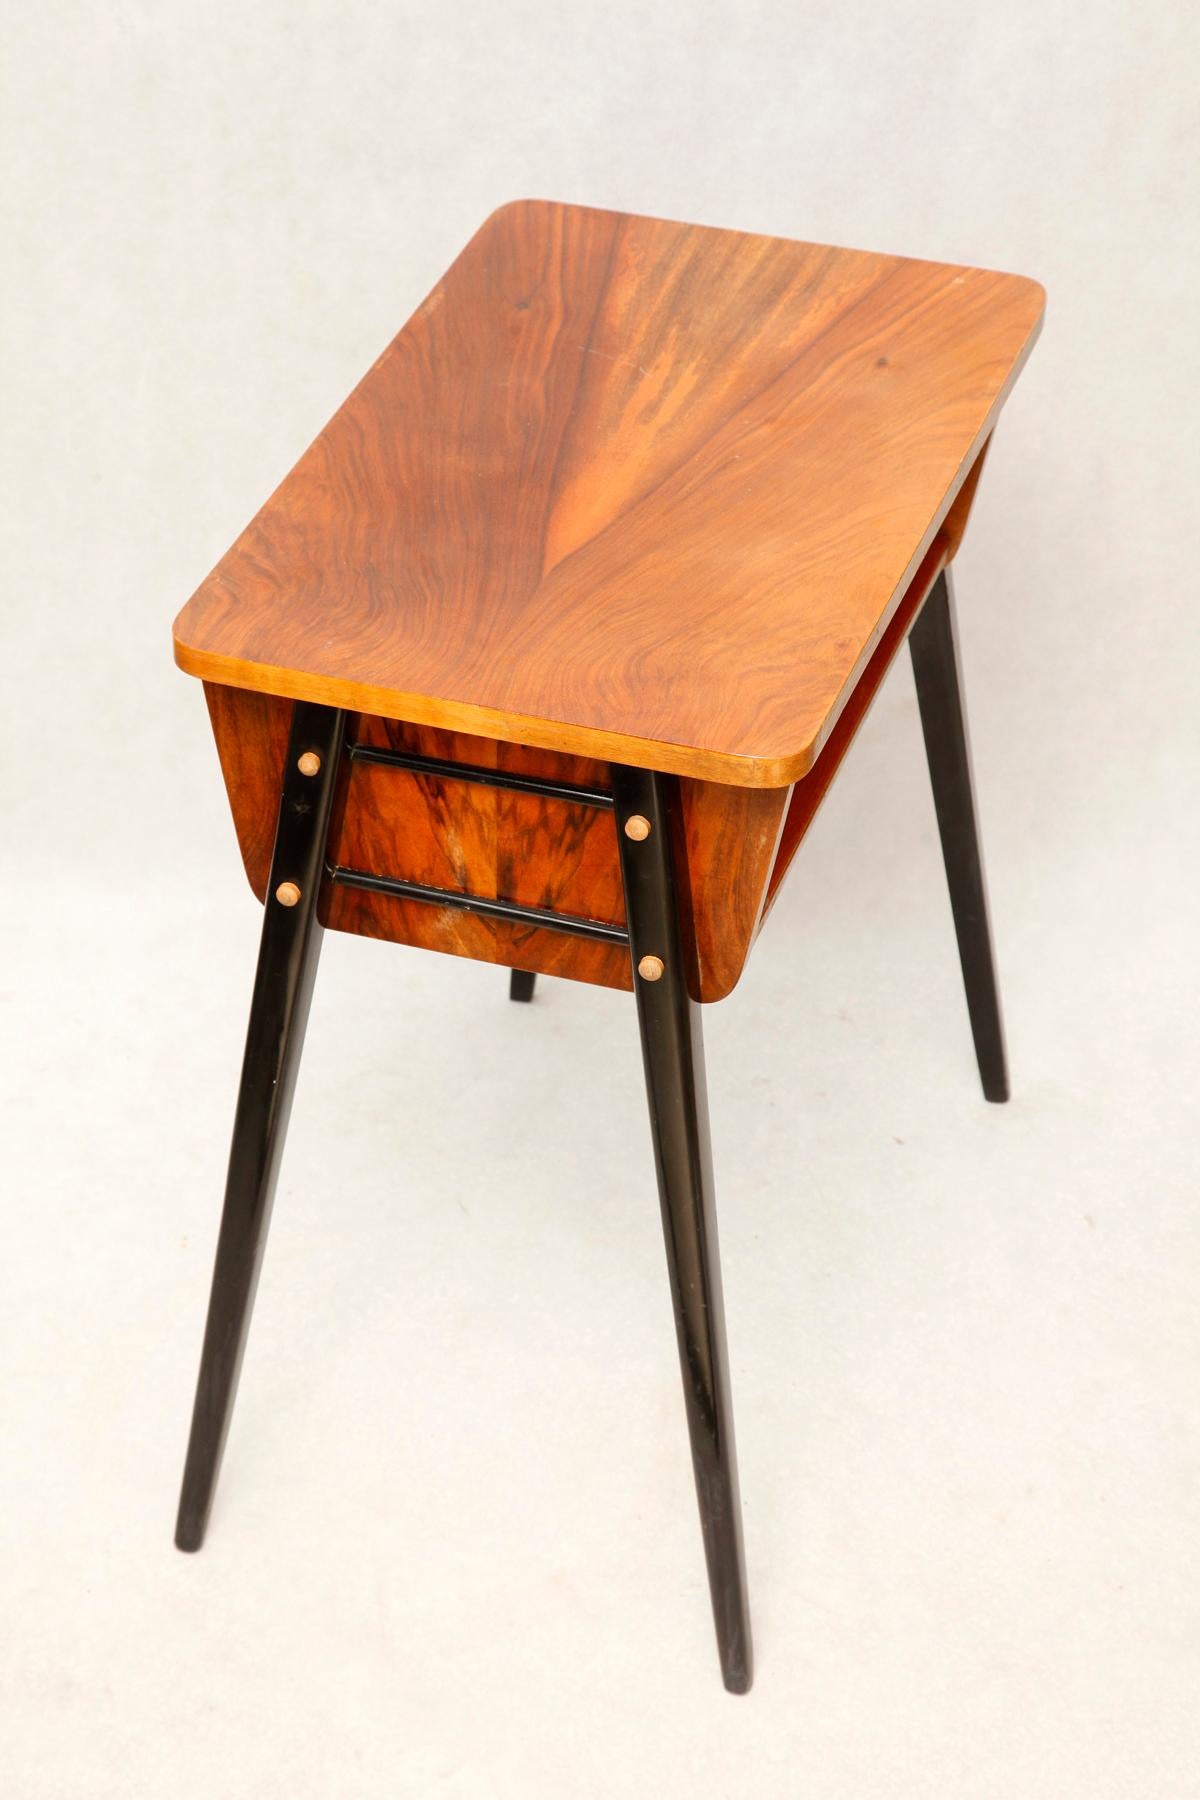 One of the most successful mass designs from the People's Republic of Poland. Simplicity and functionality. The soaring, unseen table serving as a stand for the radio. Open chamber under a small tabletop, four slim, black tapering legs coming out of